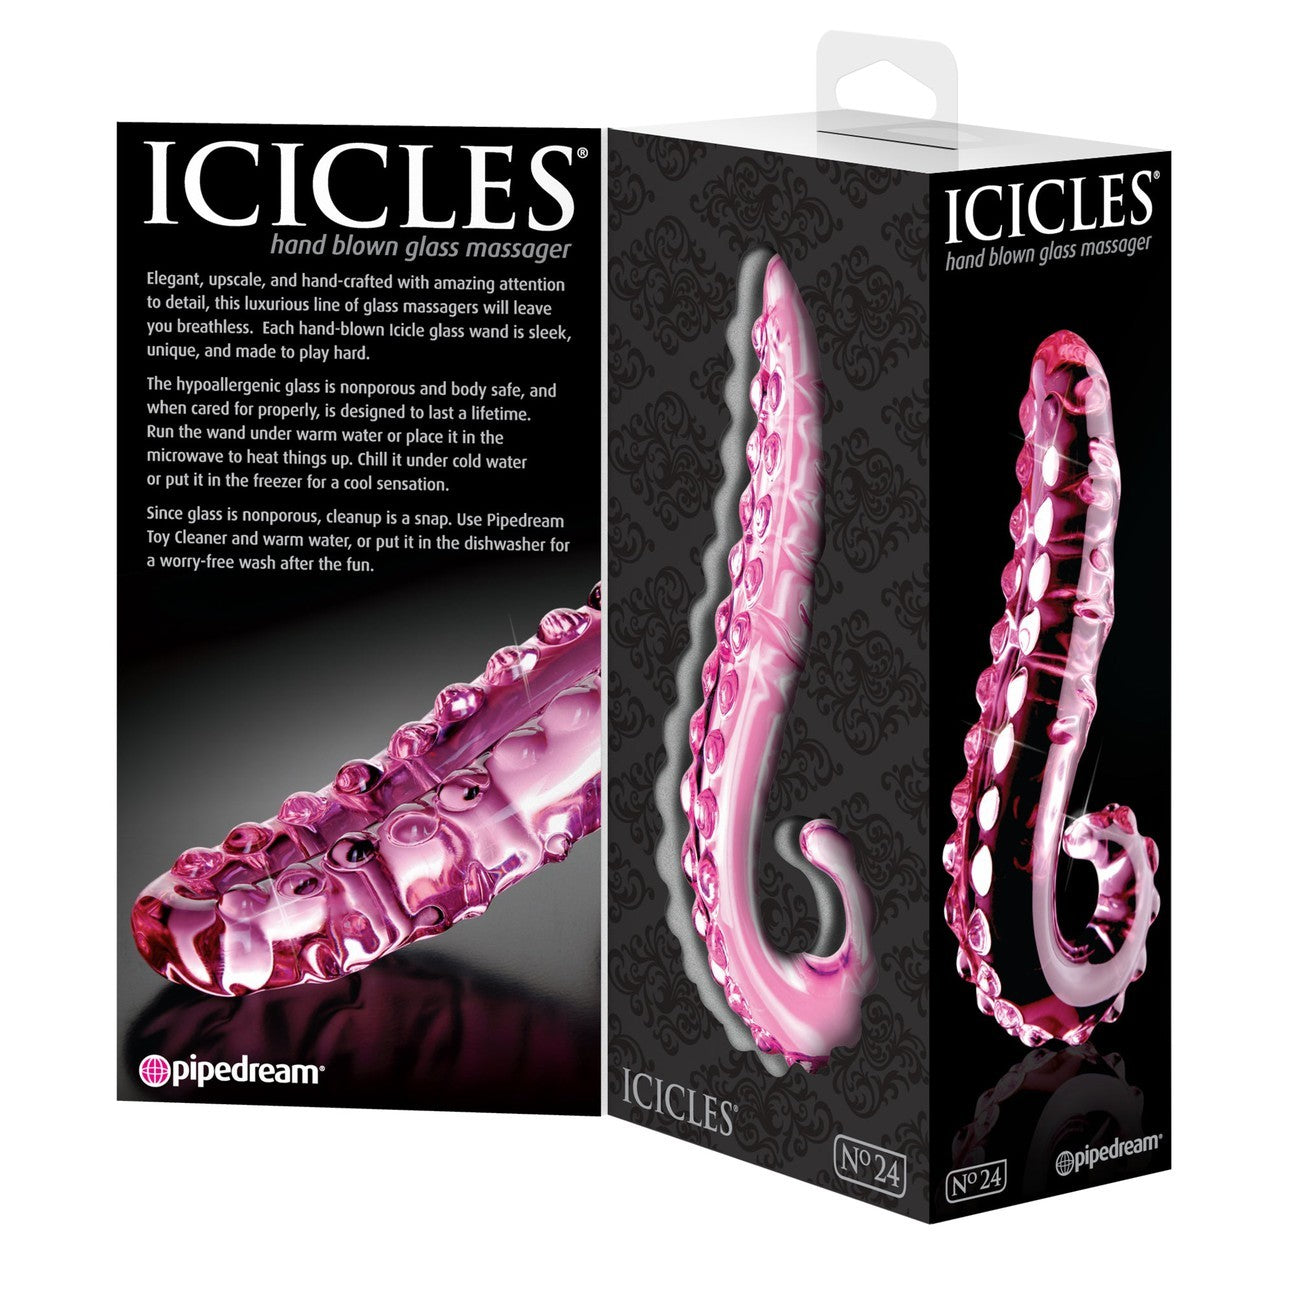 Icicles No. -"Pink